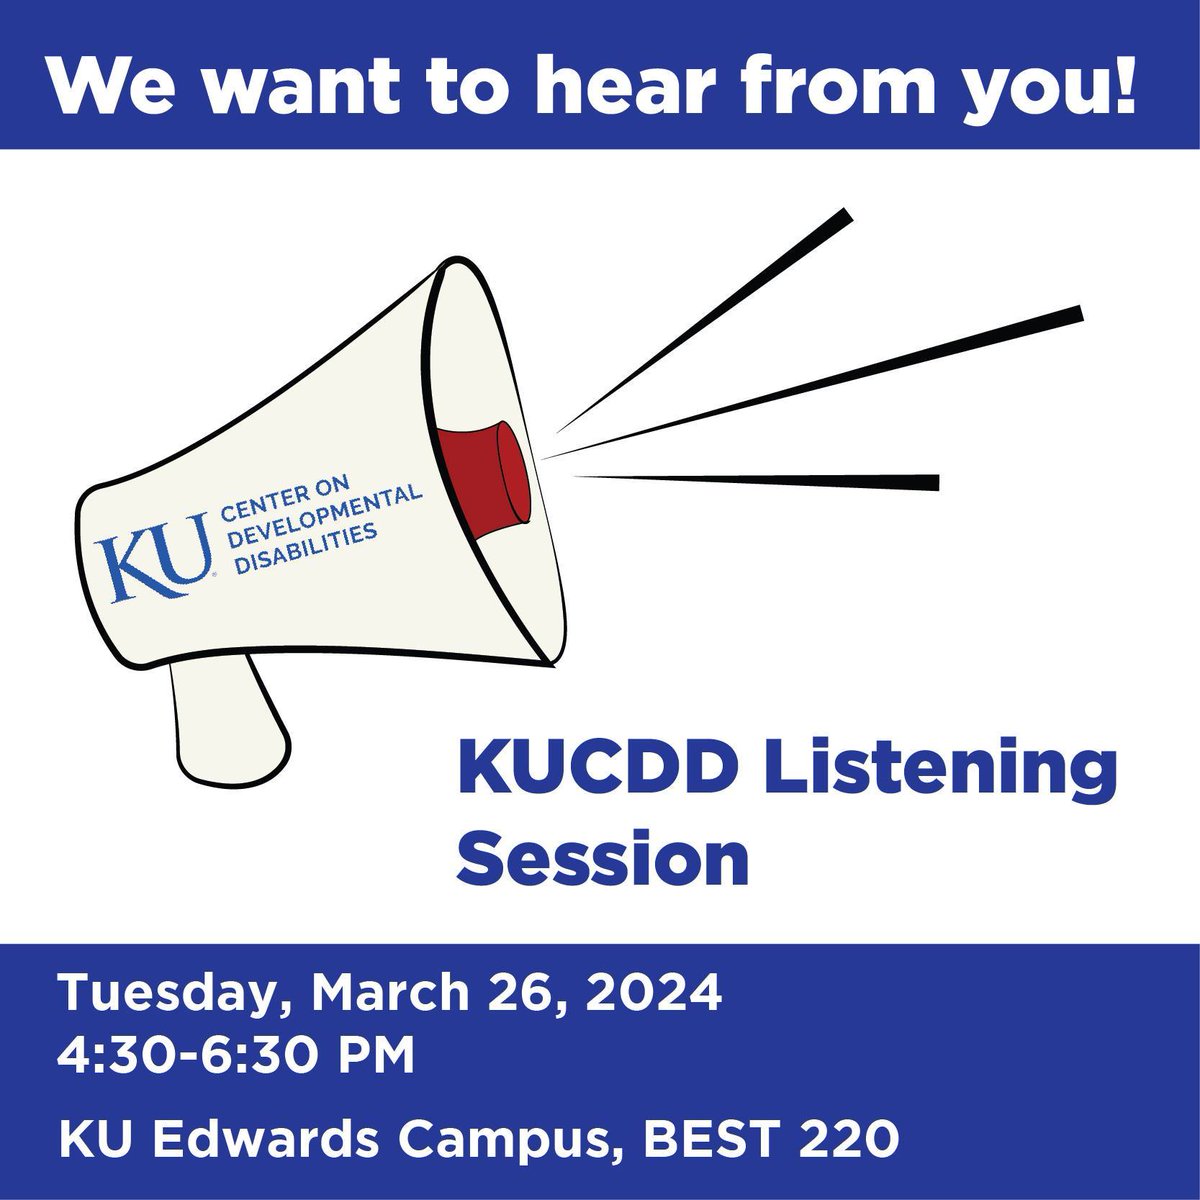 Last chance to RSVP! KUCDD wants to hear from schools! We are hosting a listening session to engage schools to understand their needs! We are meeting in BEST 220 at the KU Edwards Campus on Tuesday, 3/26/24 from 4:30-6:30 PM! Please register @ bit.ly/48pKN1C!